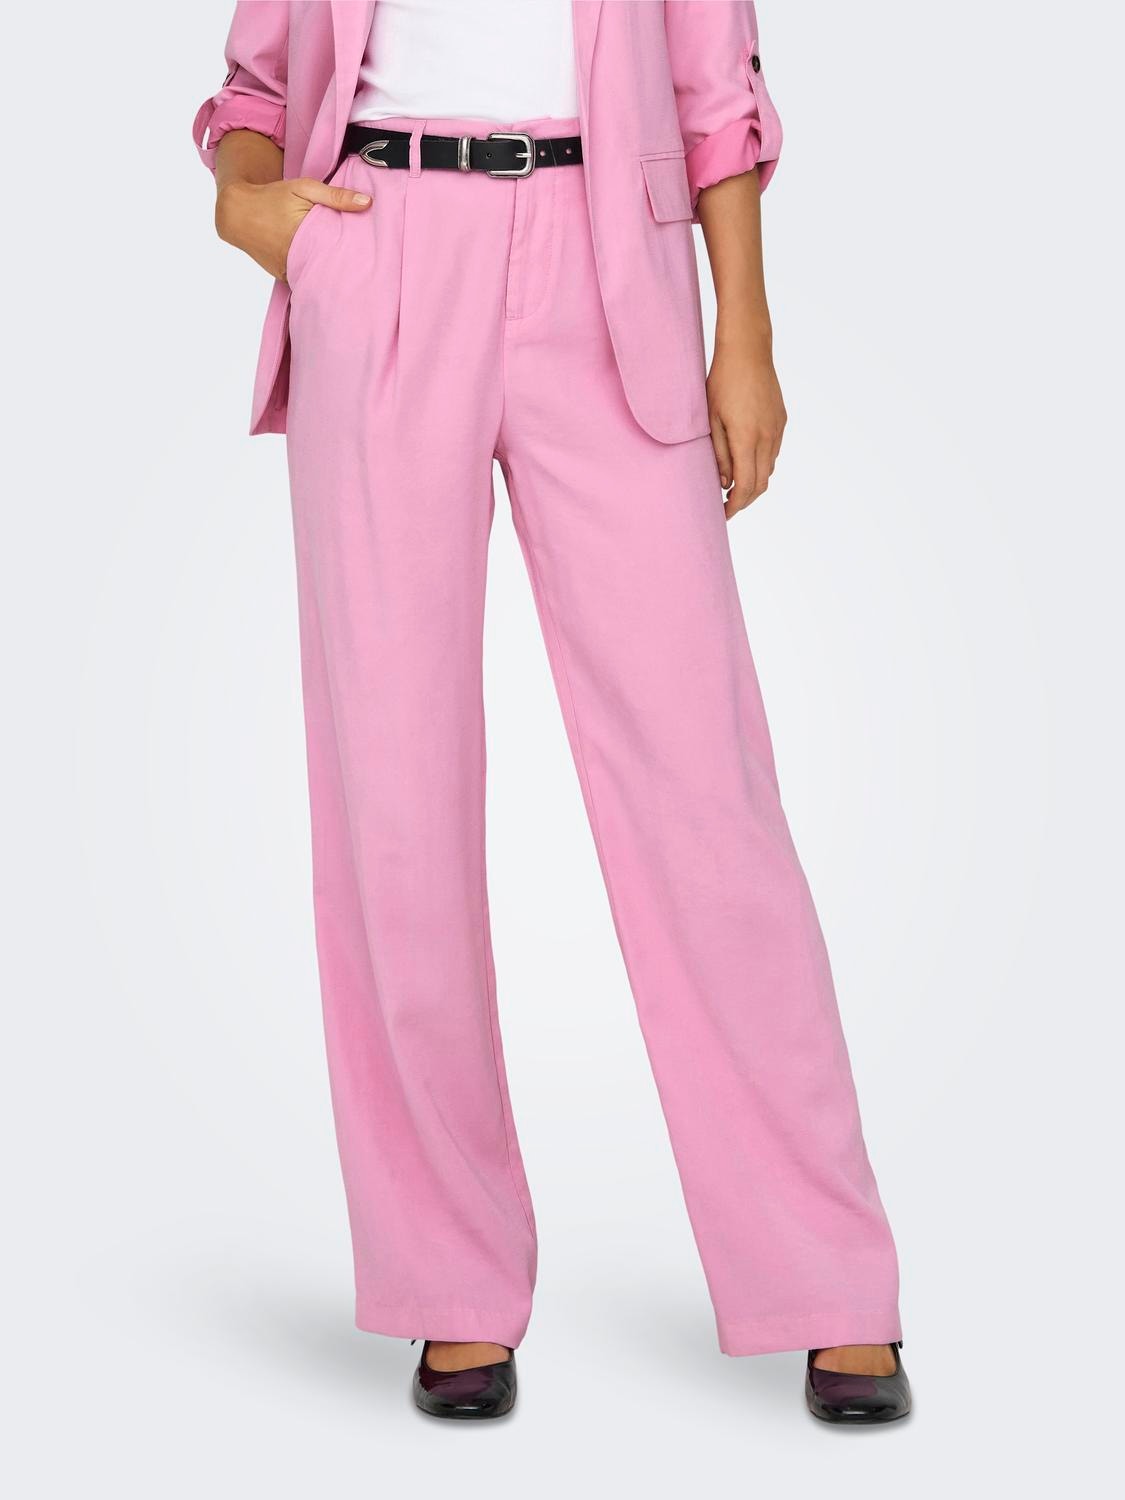 ONLY High waisted Straight Pants -Begonia Pink - 15278699